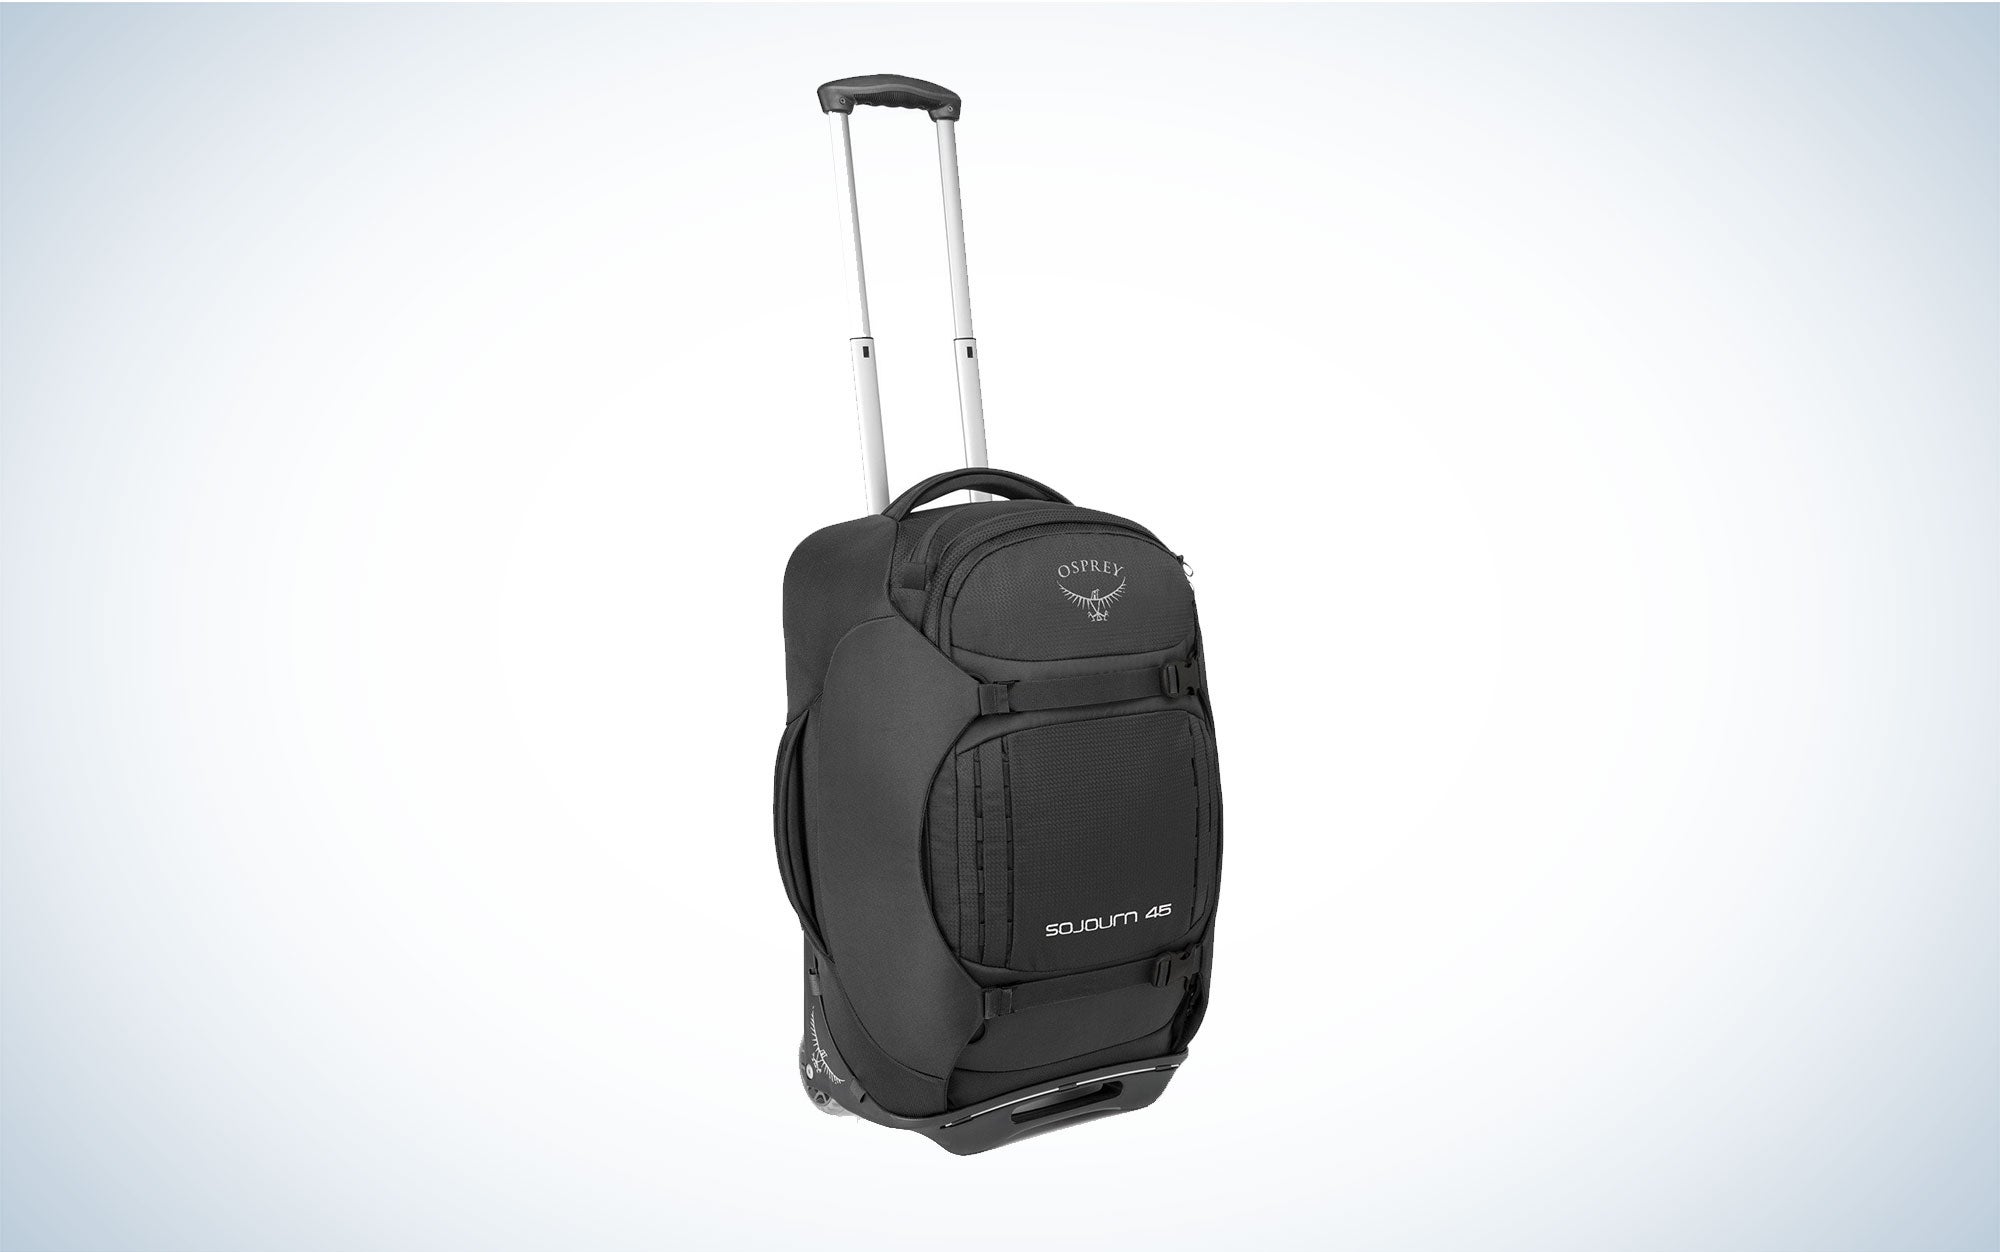 Osprey Sojourn 45L Travel Suitcase is one of the best travel accessories